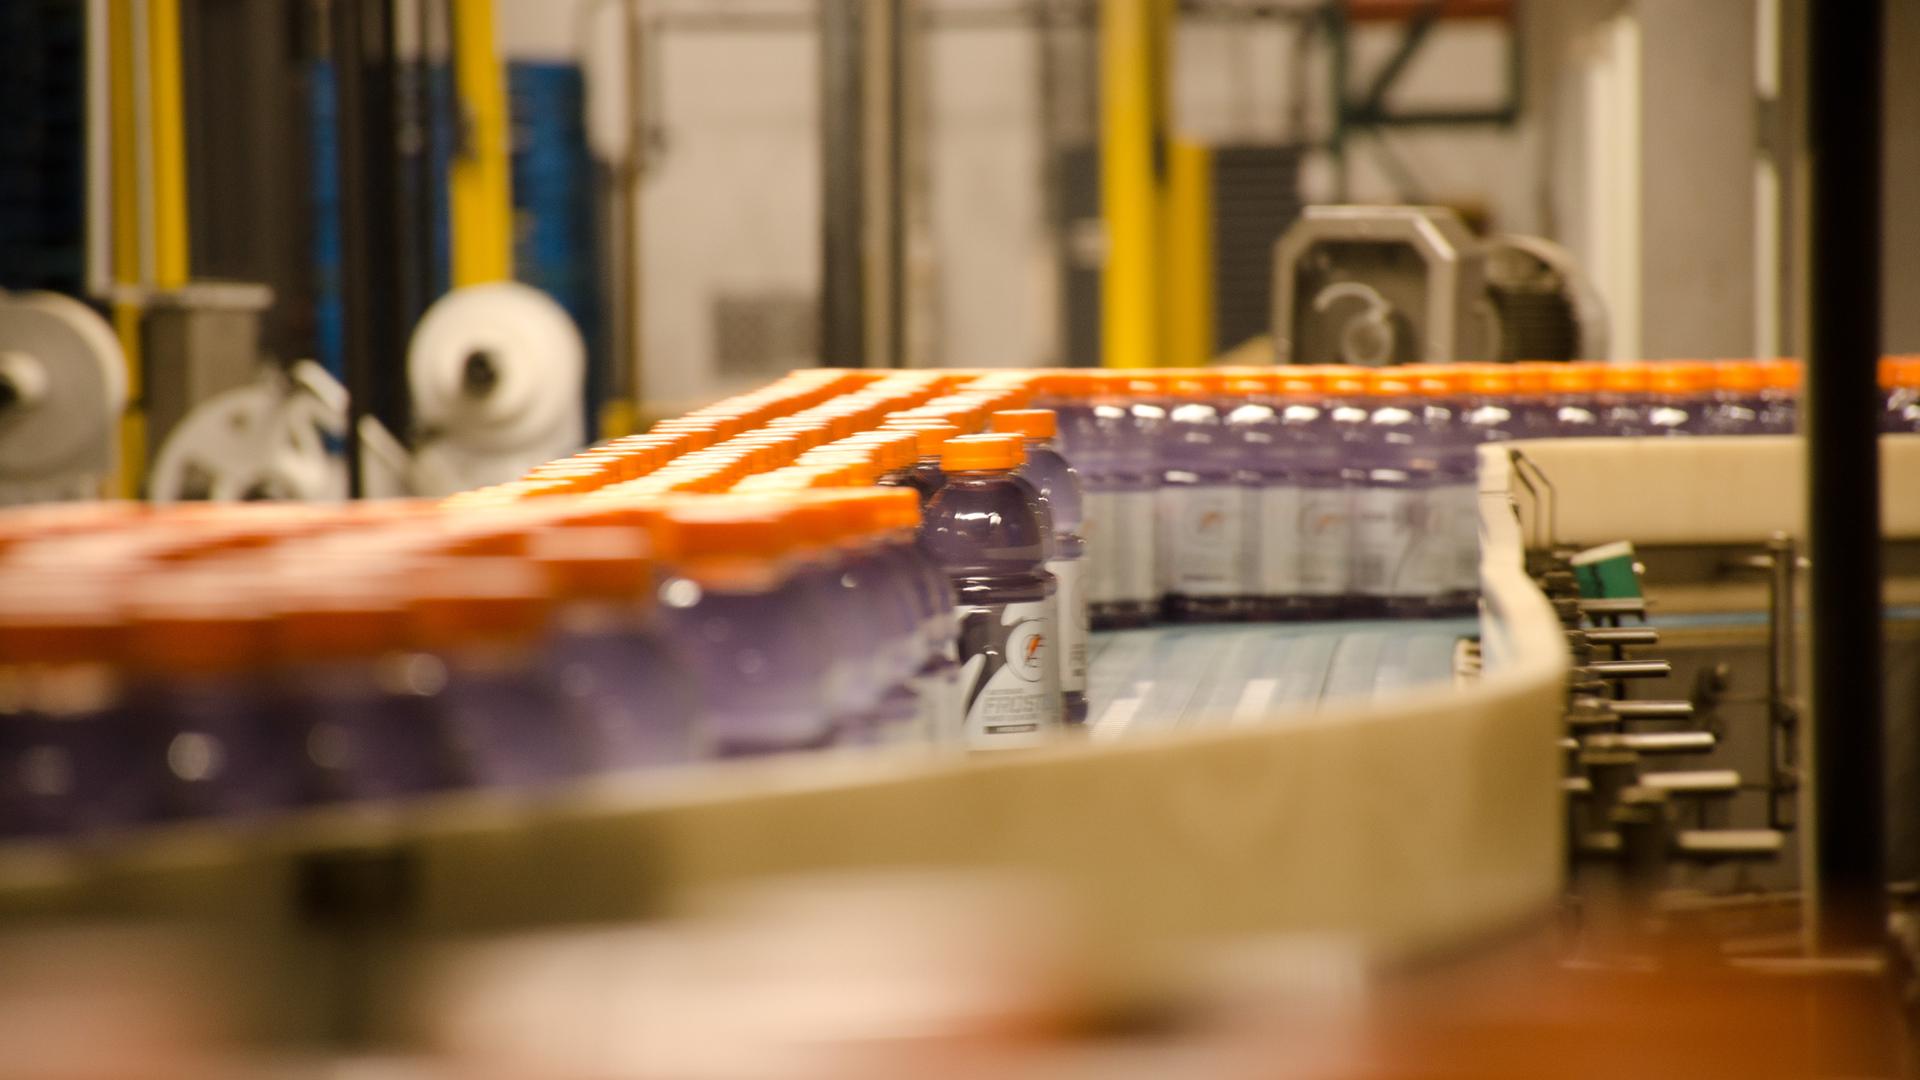 Through water-conservation strategies, PepsiCo is now saving $1.5 million annually at its Gatorade processing facility in Tolleson, AZ, and using 24 percent less water in the water-scarce Southwest. 